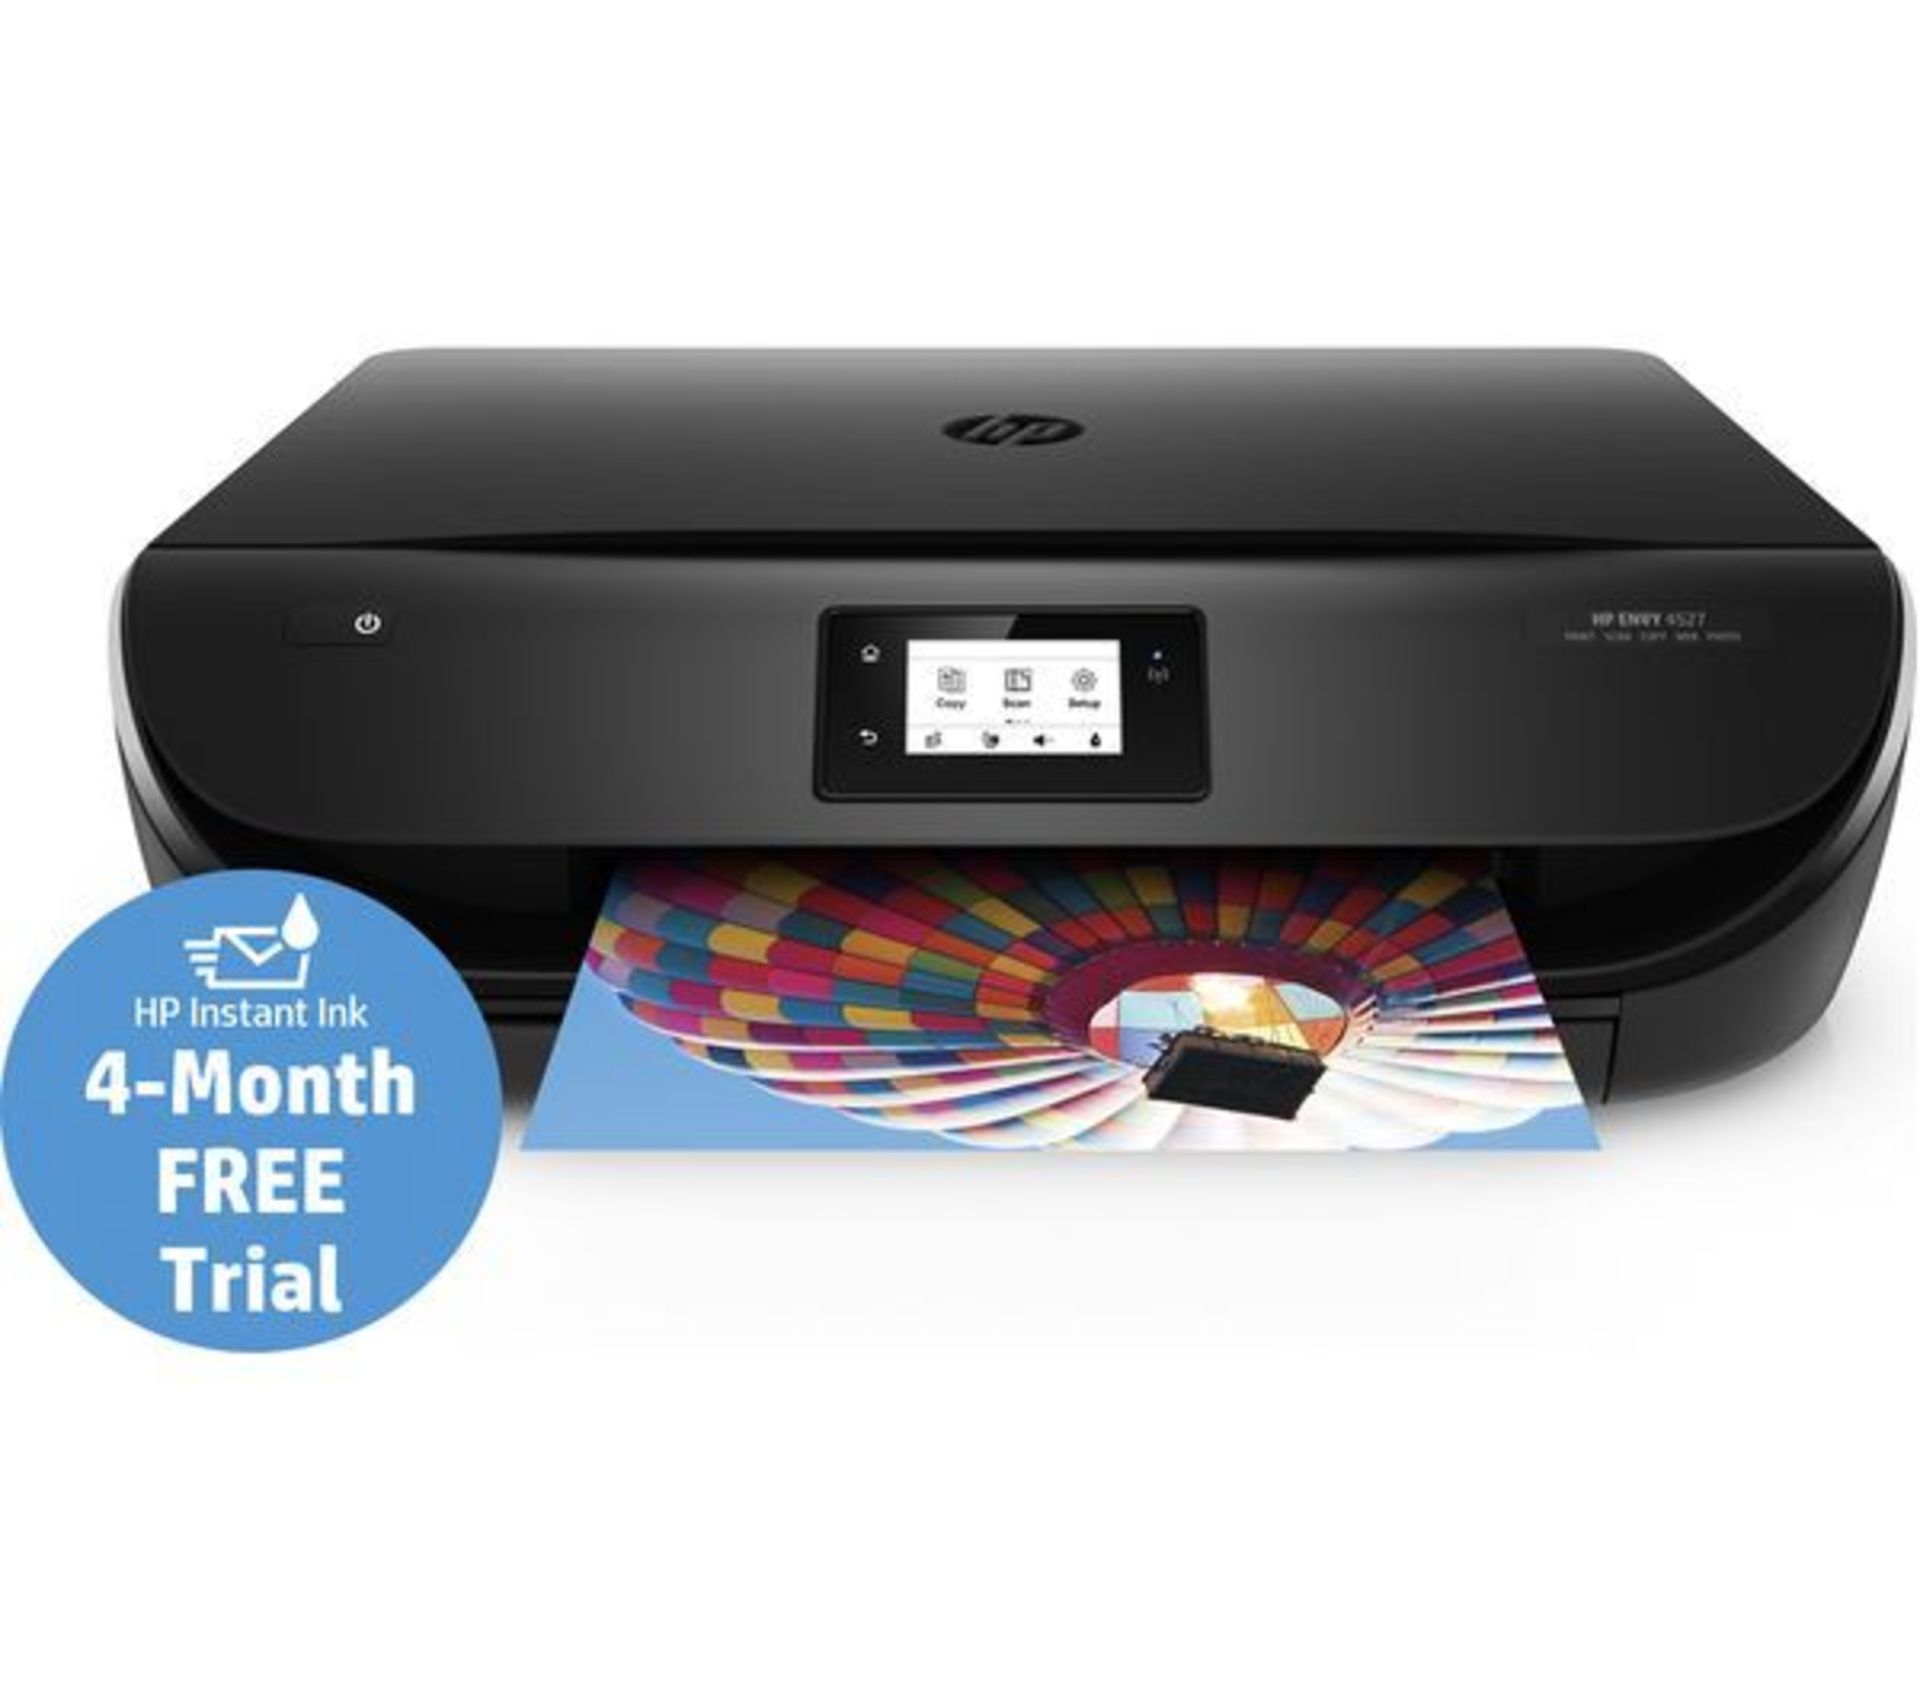 HP ENVY 4527 All-in-One Printer. - ER21. The Envy 4527 can print documents and photos wirelessly,